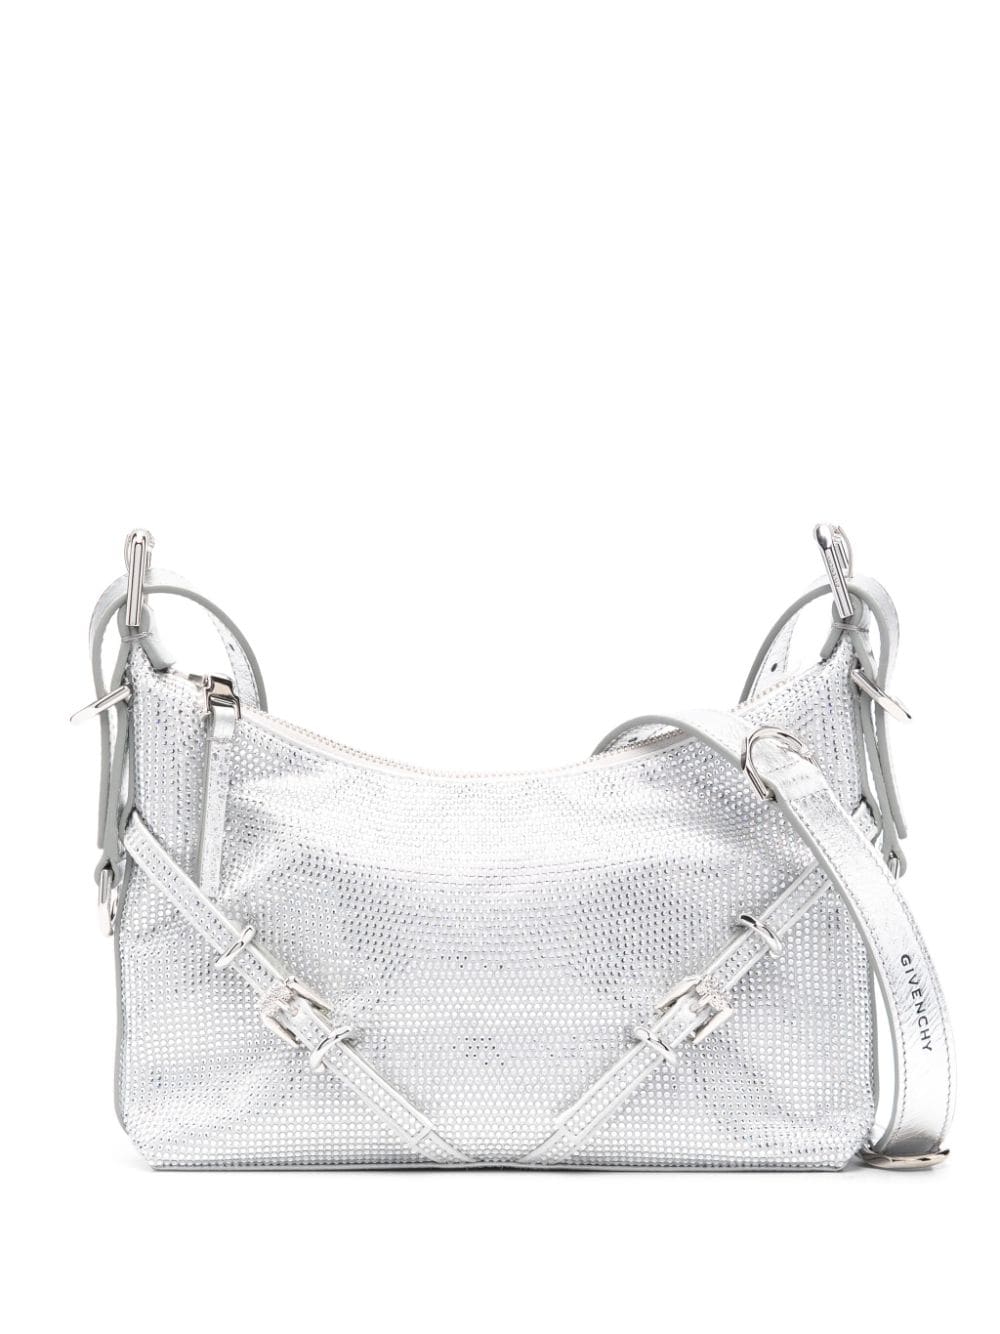 GIVENCHY Strass Crystal Mini Crossbody Shoulder Bag with Silver-Tone Accents